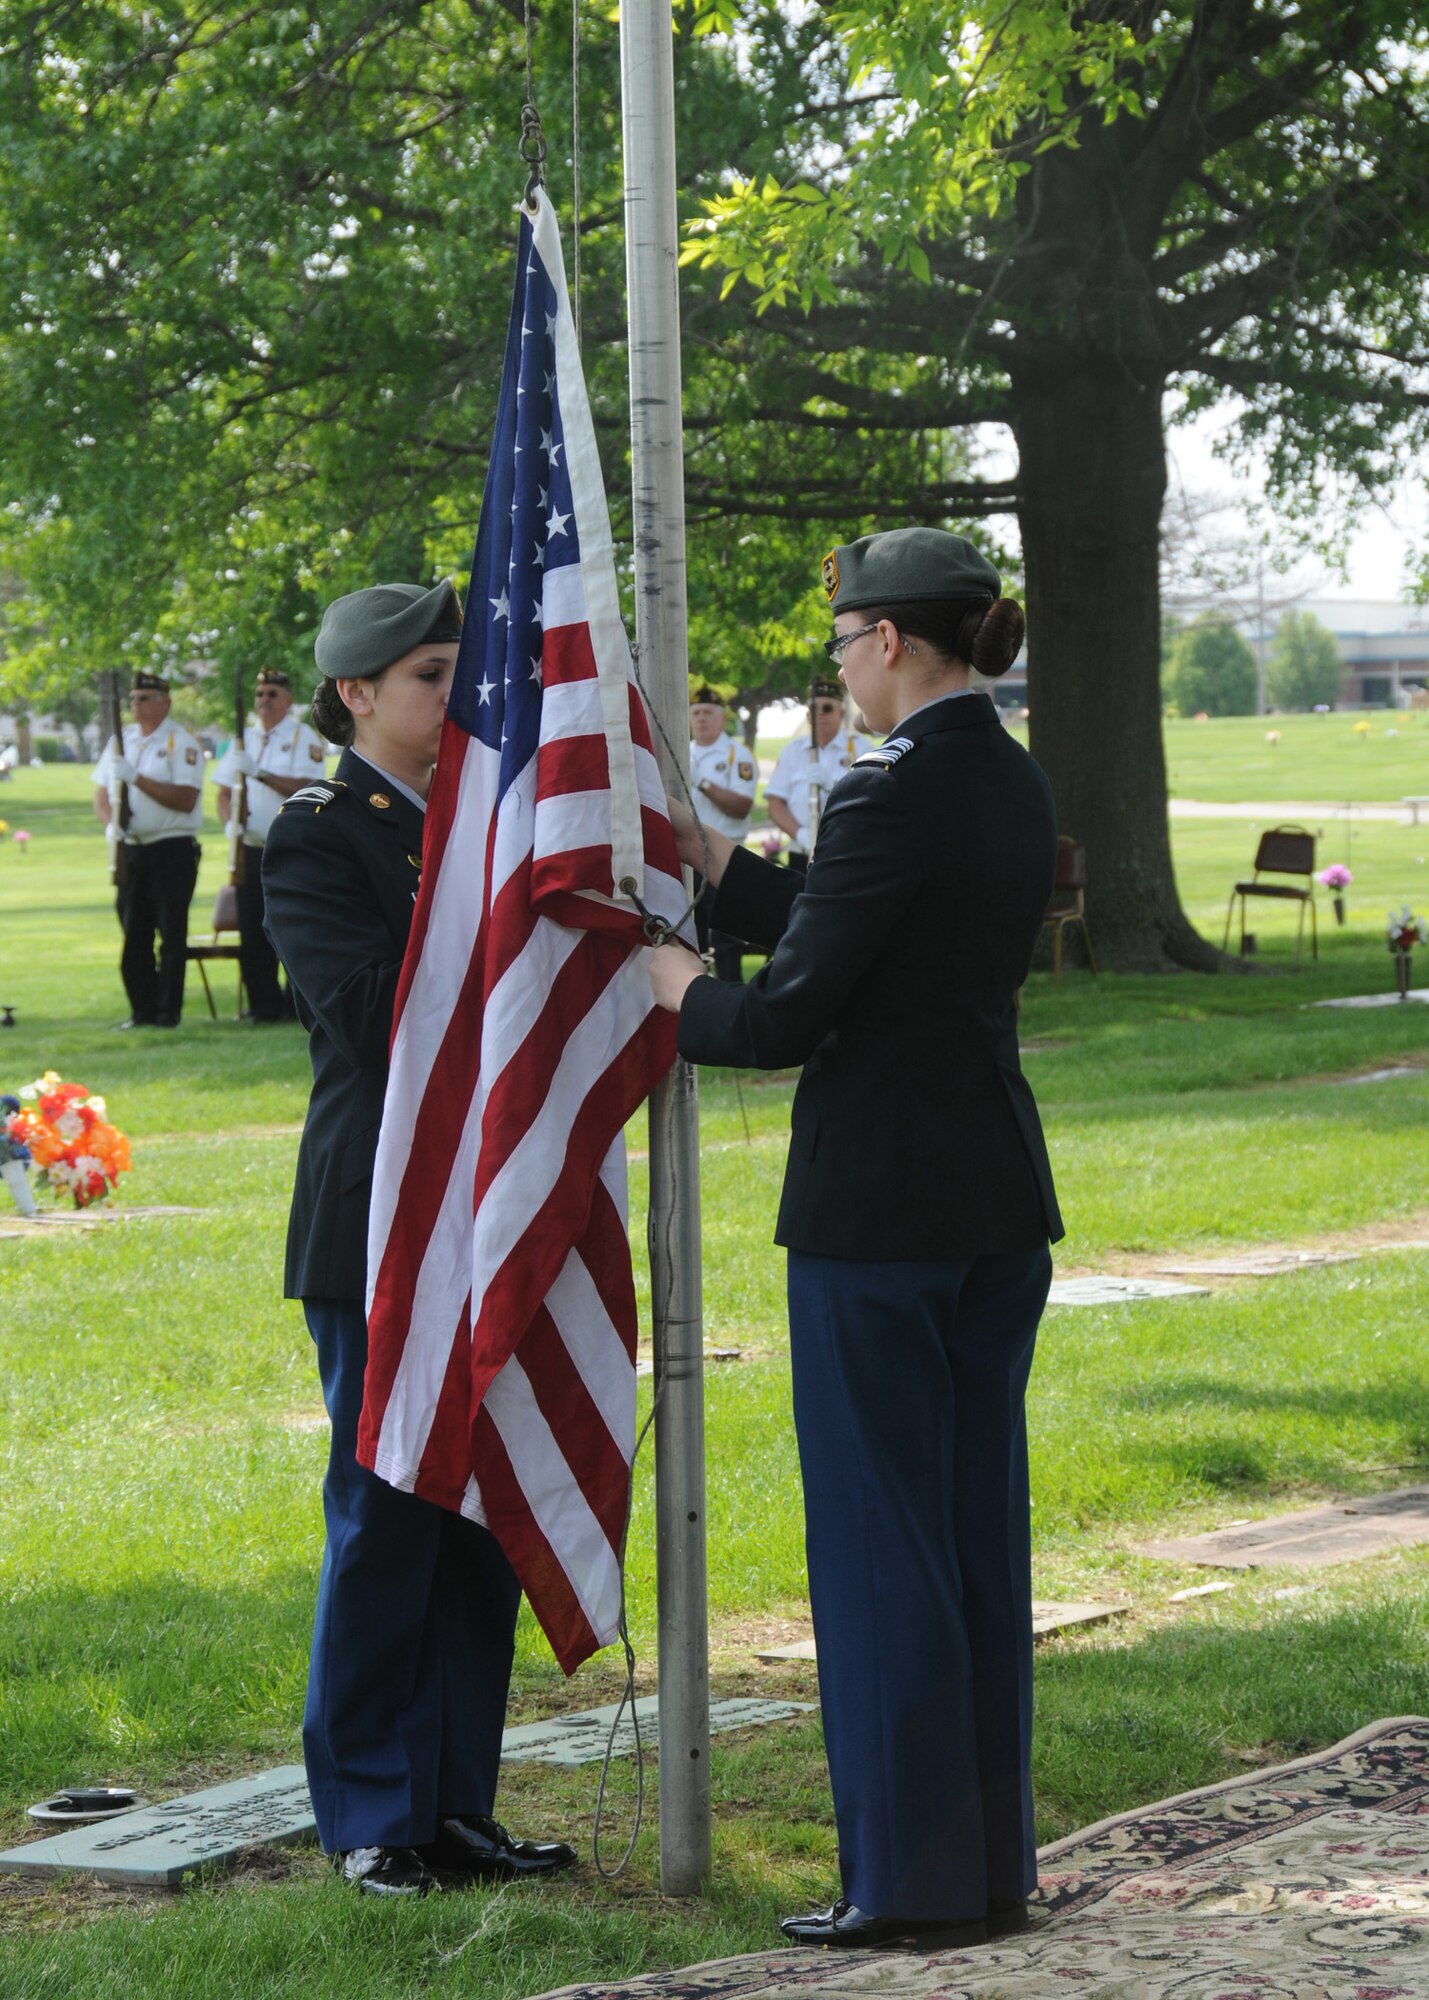 Cadets of the Sedalia Smith-Cotton High School Junior Reserve Officer Training Corps program raise the flag at the grave site of 2nd Lt. George A. Whiteman, May 17, 2014. The cadets participate in the event every year as part of the Sedalia, Mo., community's Armed Forces remembrance ceremony by raising the flag and singing the national anthem. (U.S. Air National Guard photo by Senior Airman Nathan Dampf/Released)